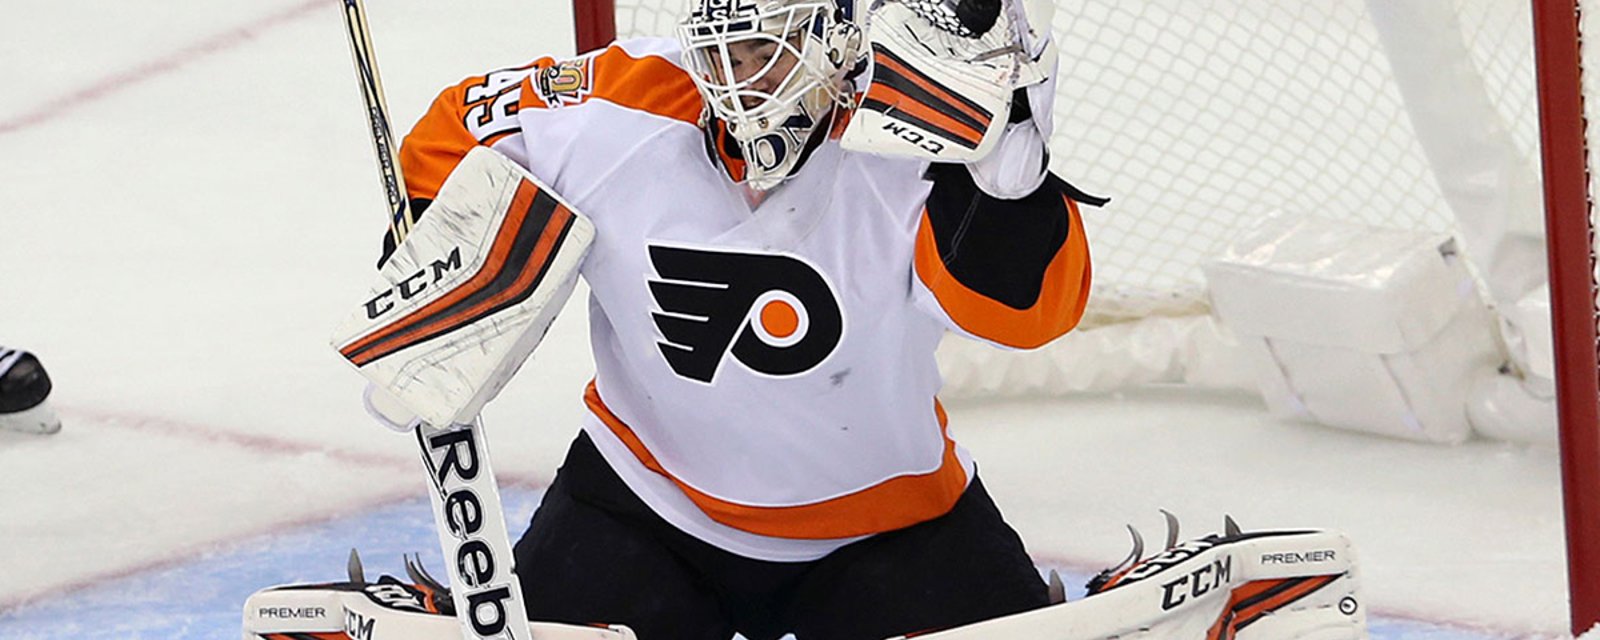 Report: Flyers cut 6 players from roster